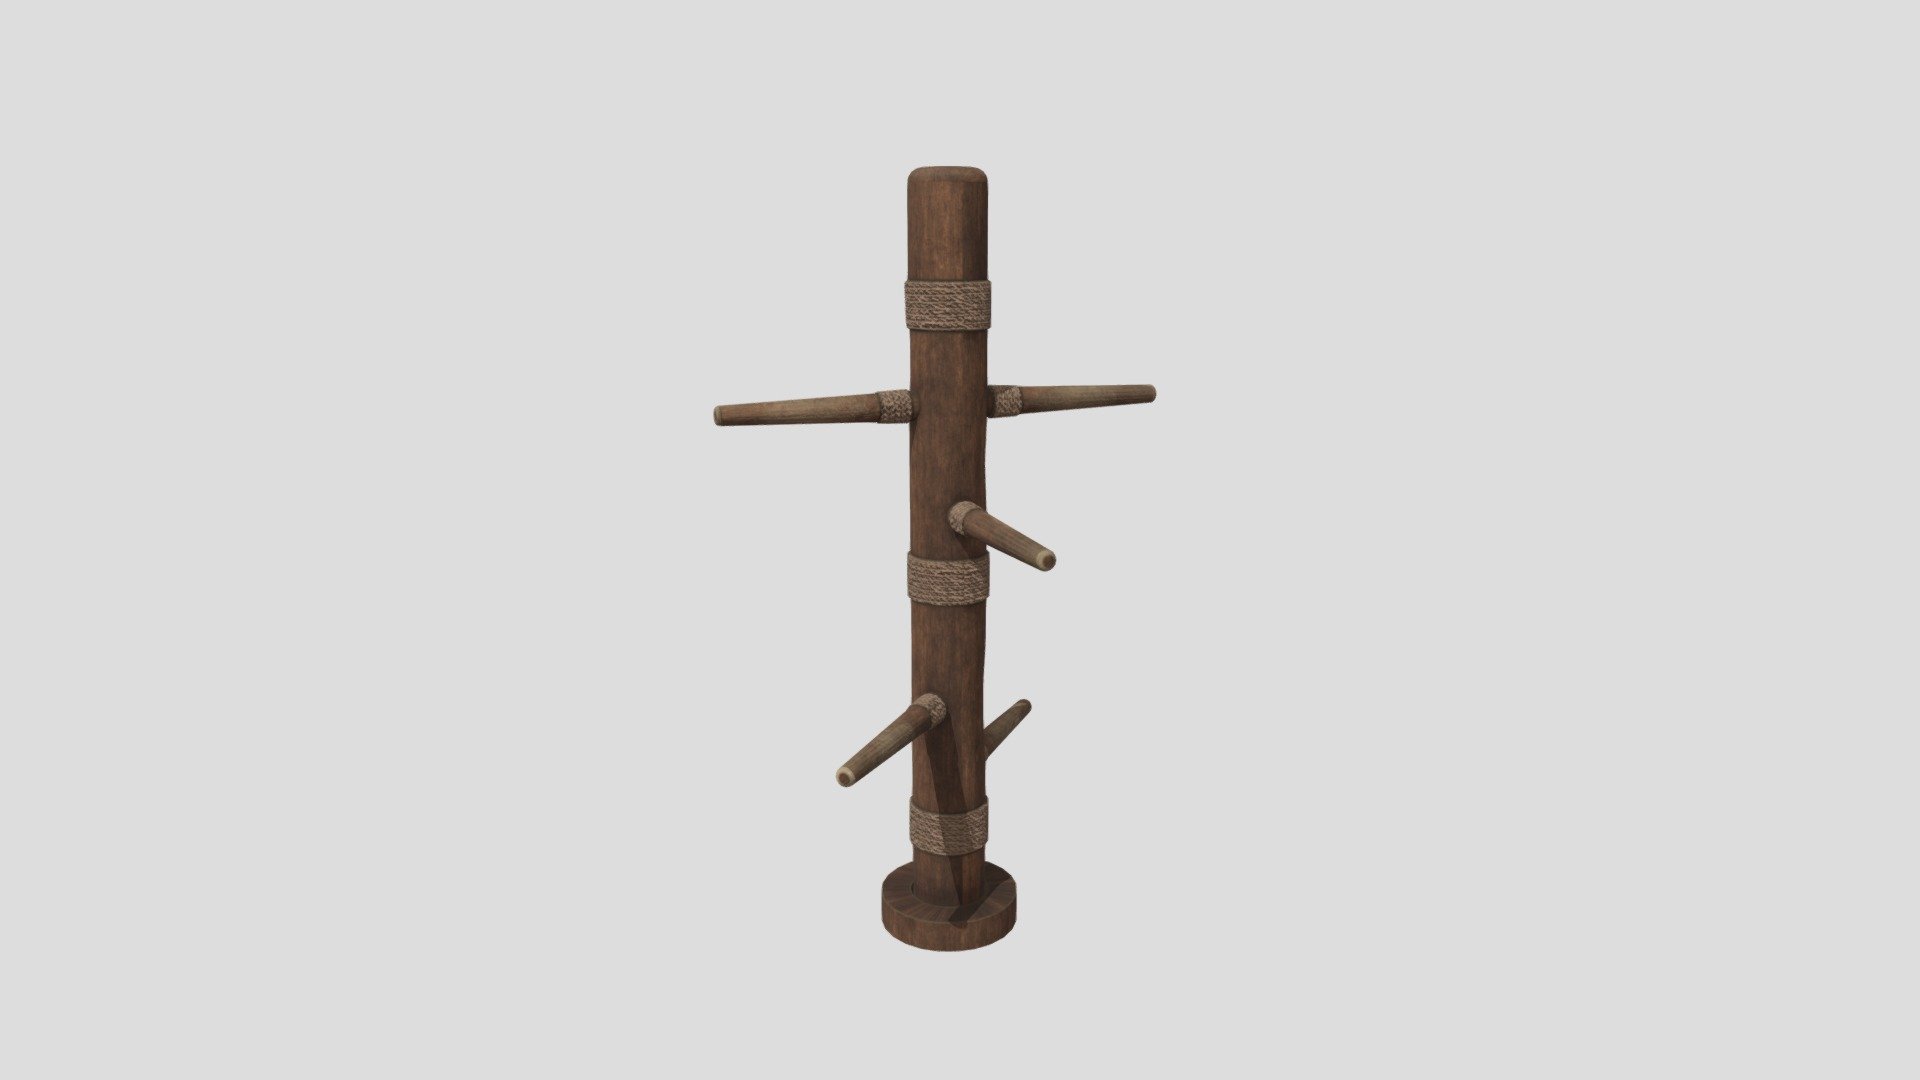 This Training Dummy is perfect for any medieval, fuedal japan, or boot camp. The model is viewable from all angles and distances. The pole is placed in a wooden hole that can be seperated and animated for more realism in animations.

This Includes:

The mesh
4K and 2K Texture Set (Albedo, Roughness, Normal, Height)
The mesh is UV Unwrapped with vertex colors for easy retexturing 3d model